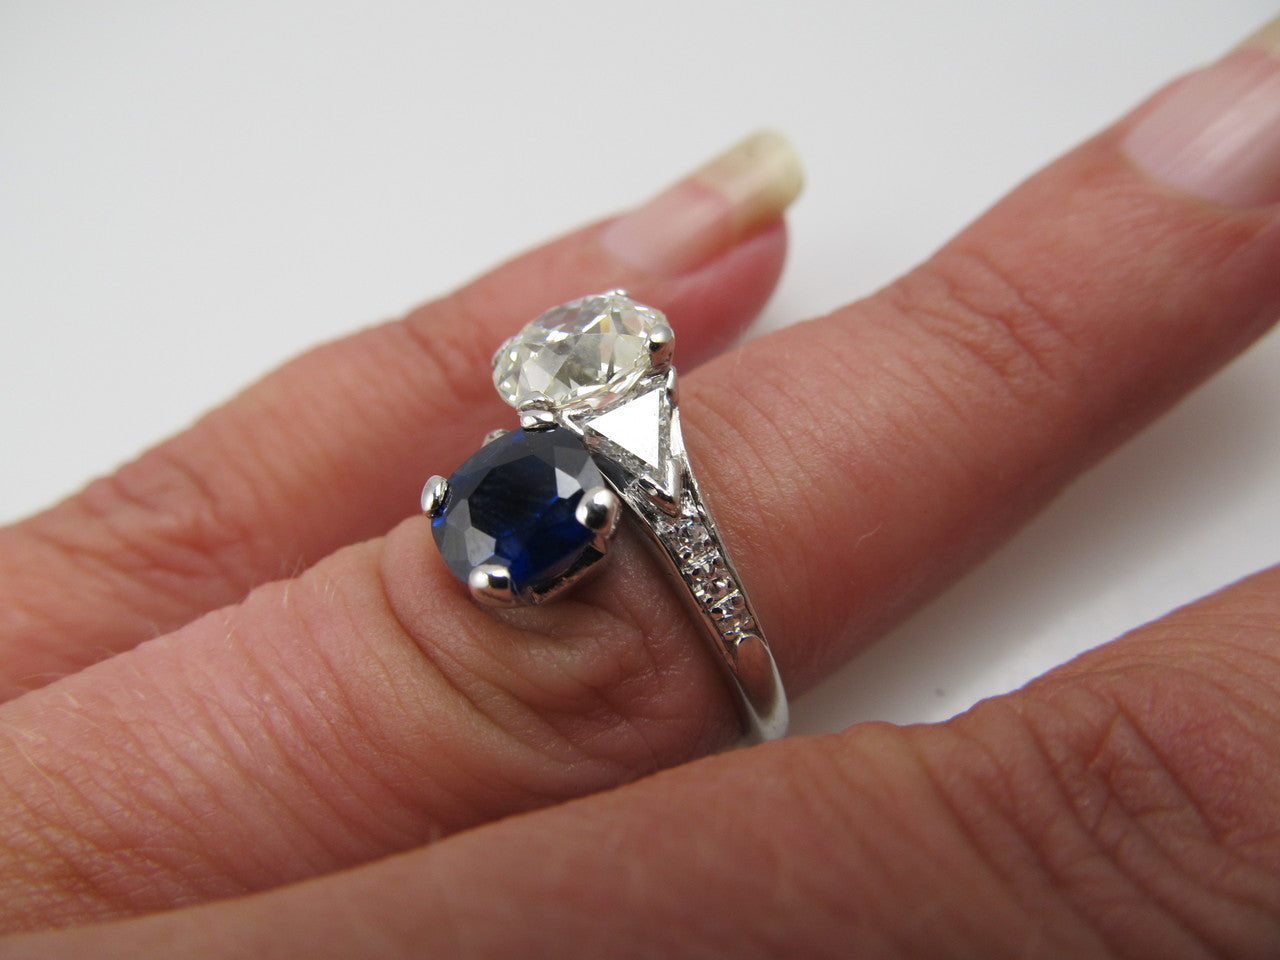 Platinum Ring With A 1.92ct Old Cut Diamond, 1.42ct Natural Sapphire, Circa 1920